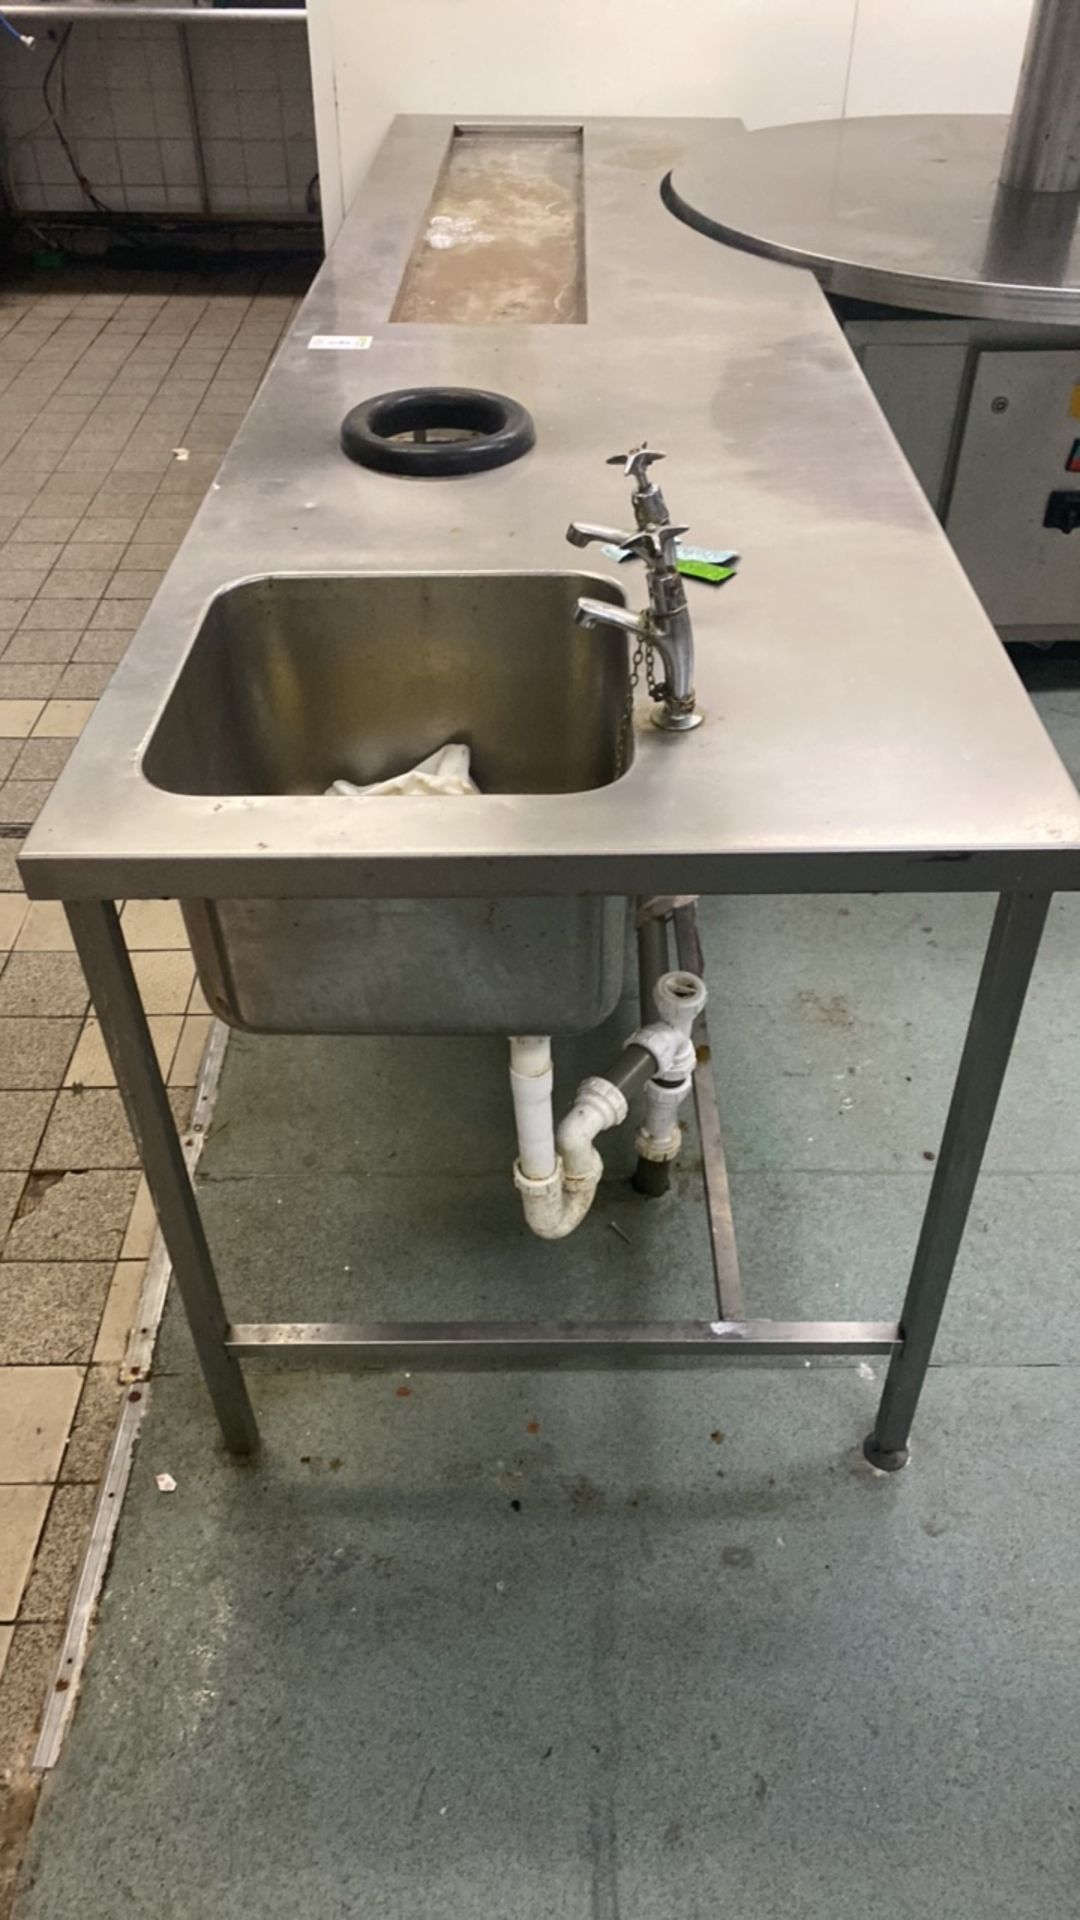 Stainless Steel Preparation Unit With Sink - Image 2 of 3